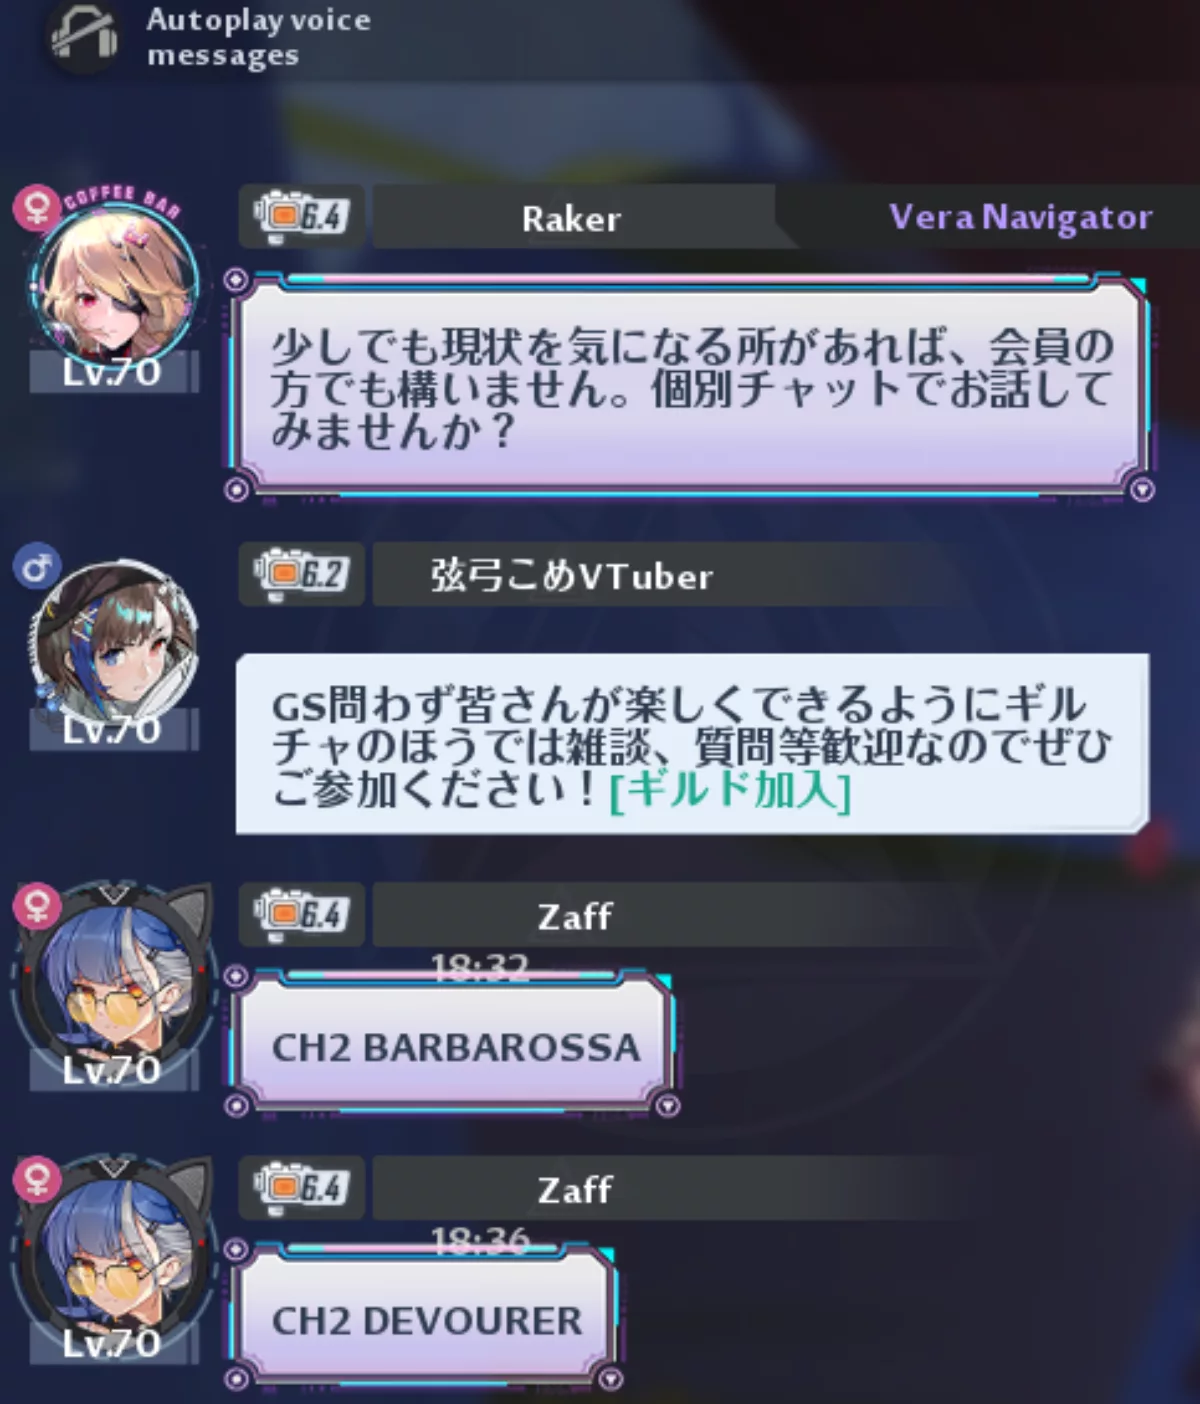 World Chat in Tower of Fantasy, mixed with different languages.